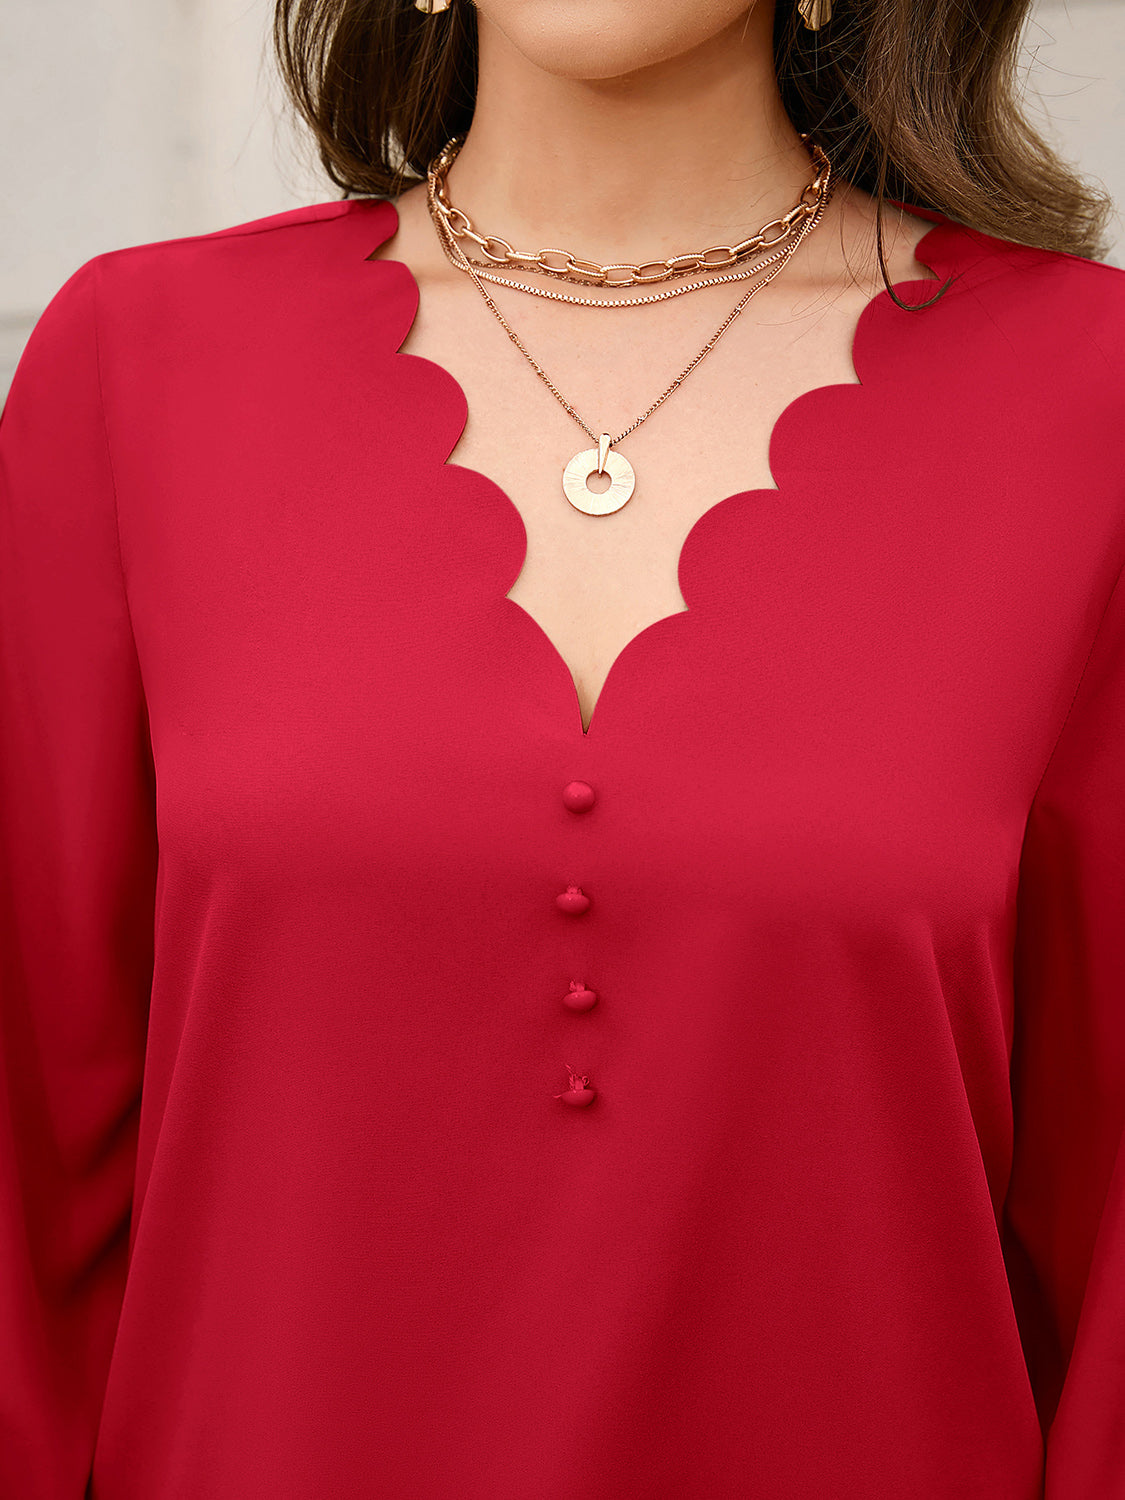 V-Neck Long Sleeve Blouse - Women’s Clothing & Accessories - Shirts & Tops - 8 - 2024